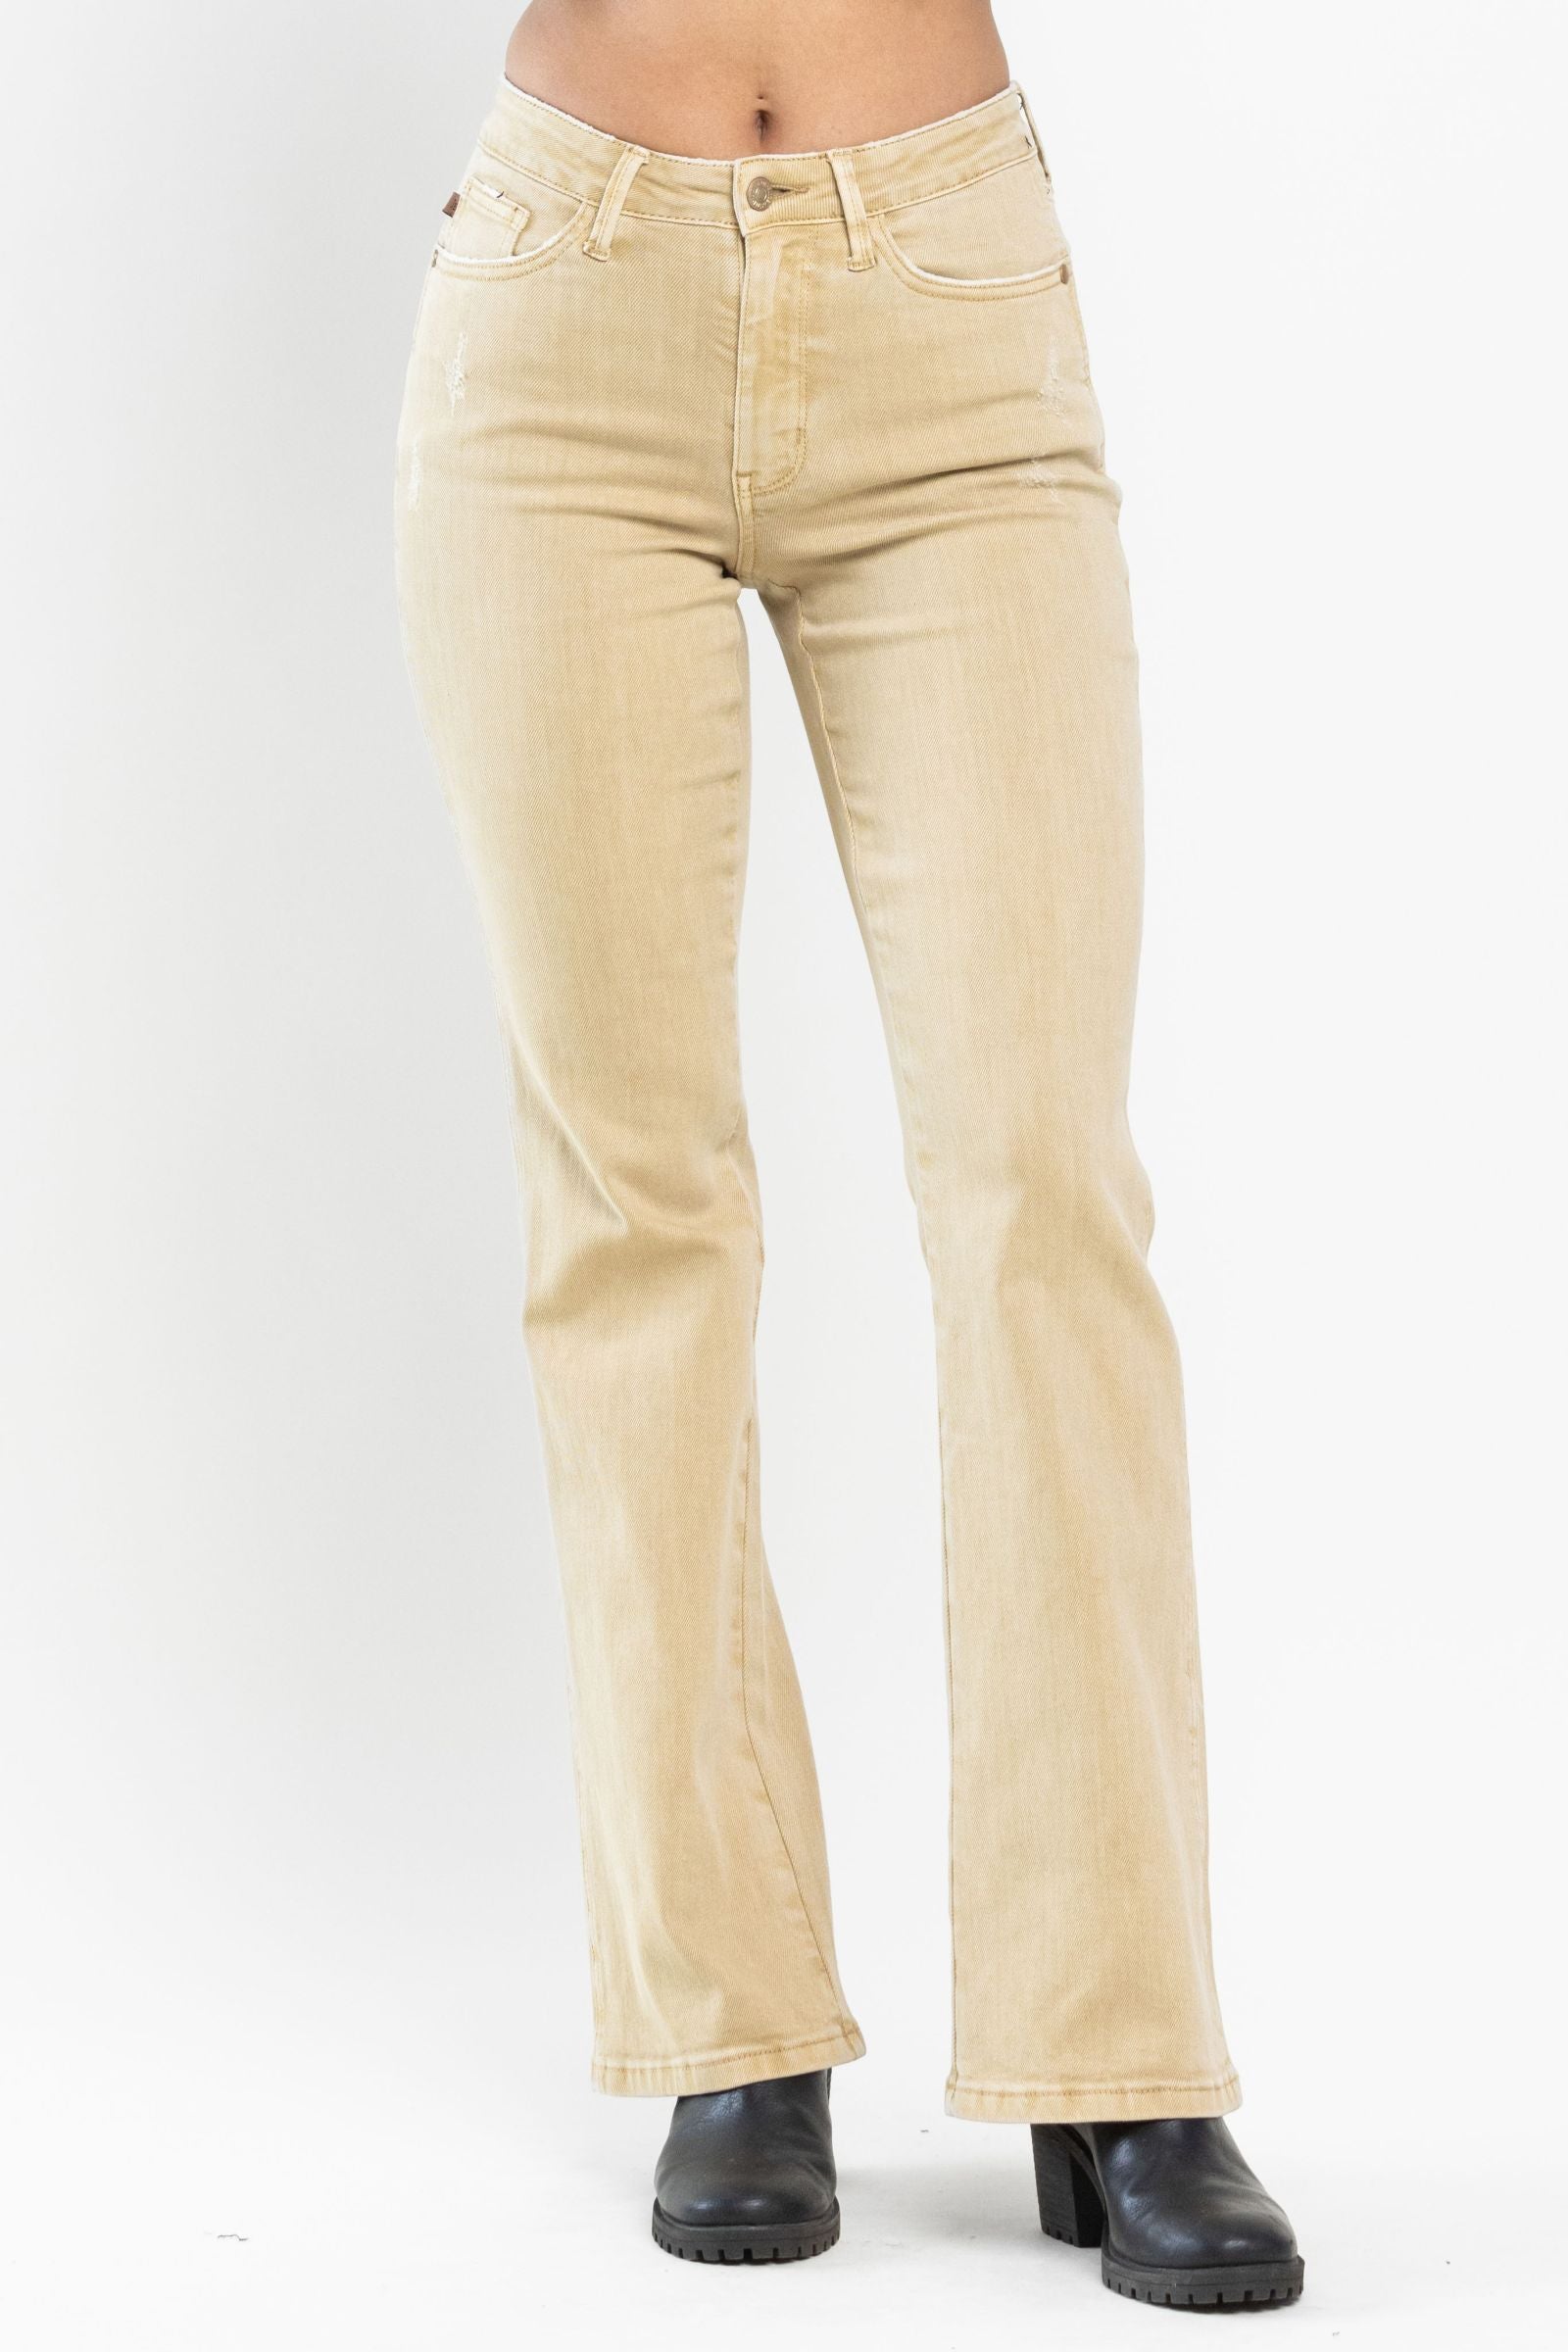 Judy Blue Khaki Slim Bootcut Jeans-200 Jeans- Simply Simpson's Boutique is a Women's Online Fashion Boutique Located in Jupiter, Florida